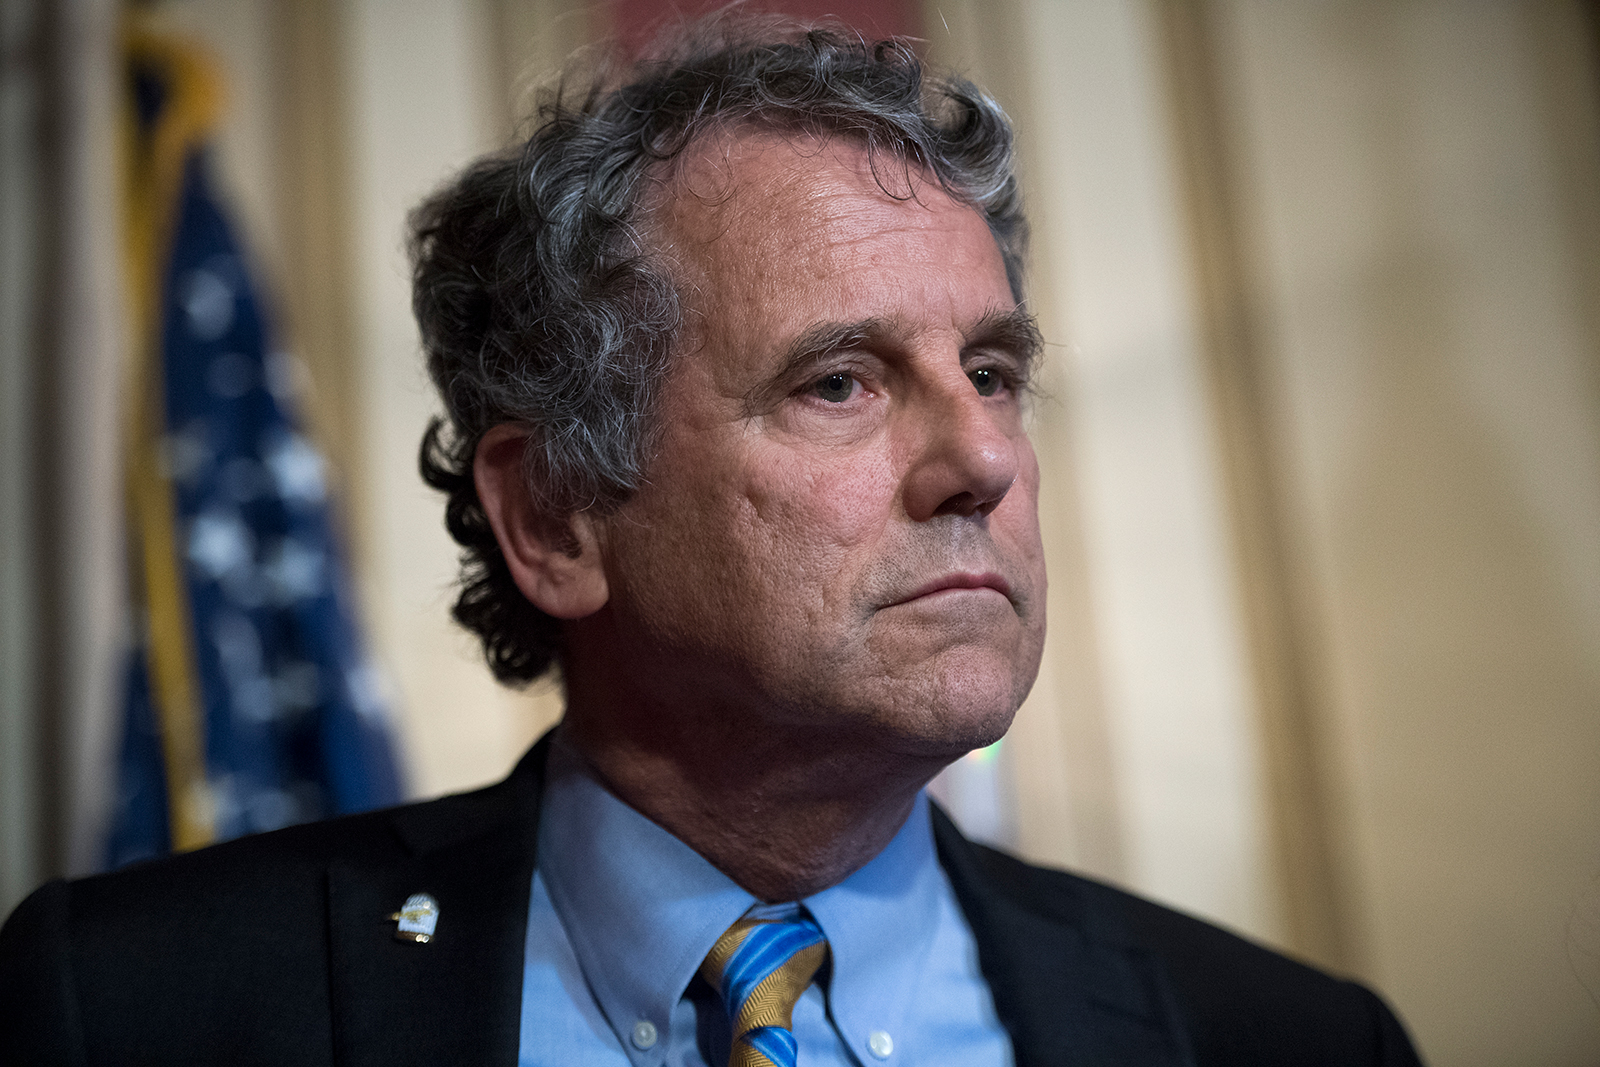 Sen. Sherrod Brown conducts a news conference in the Capitol on September 9, 2019.